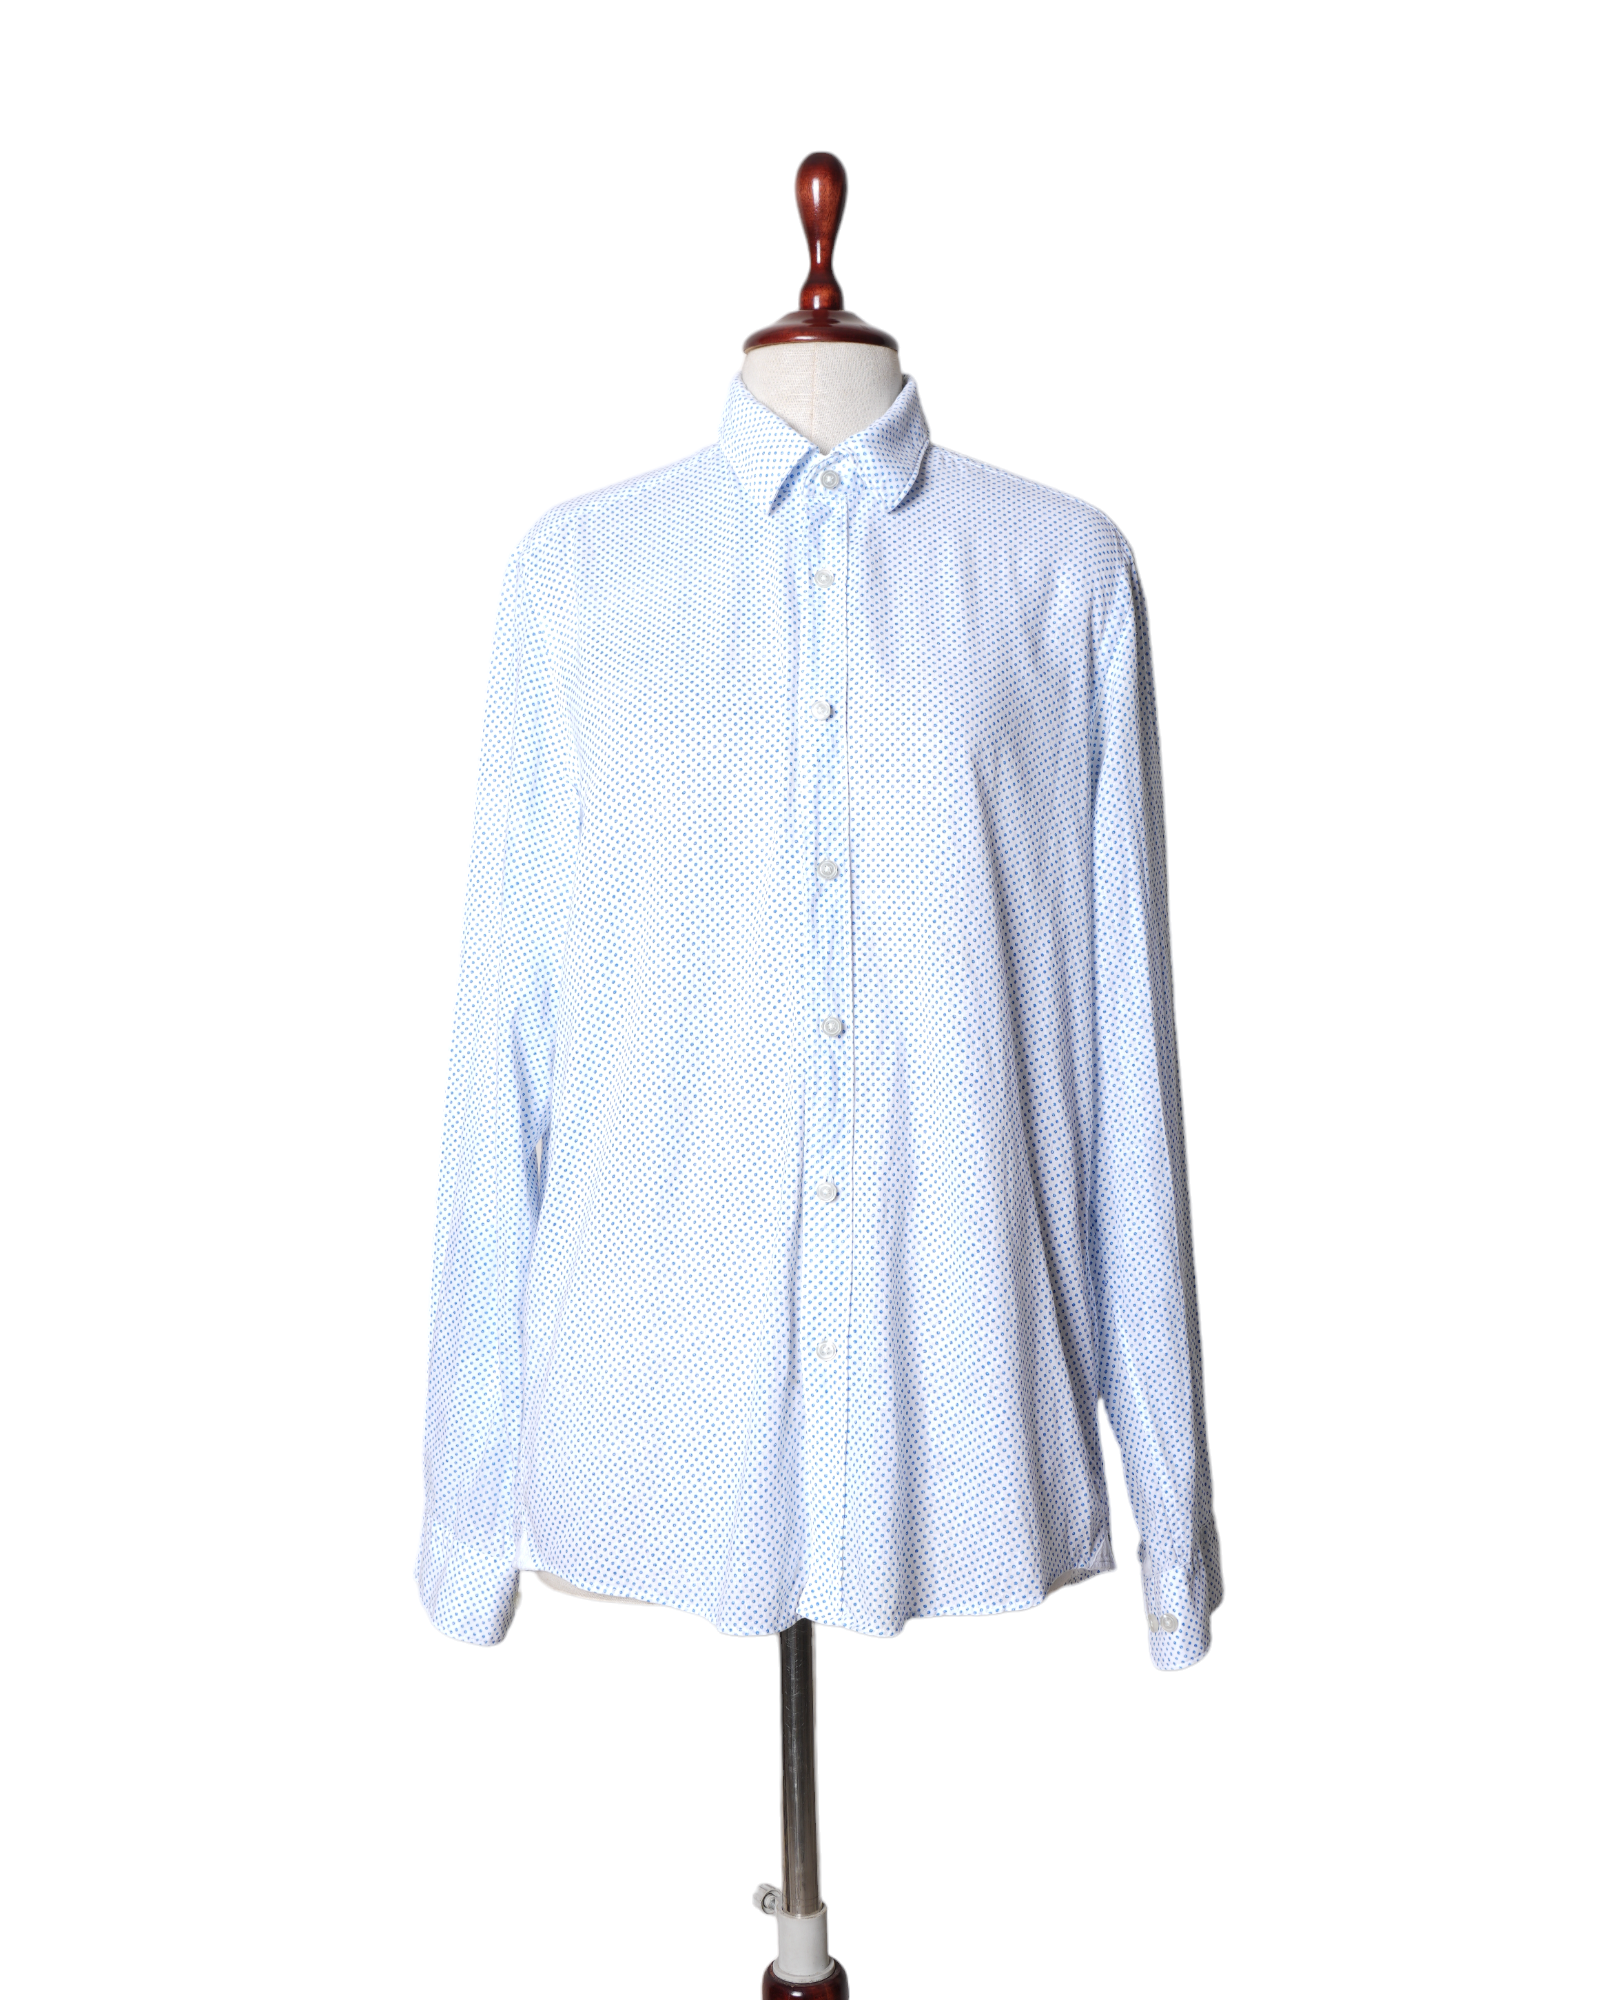 Boss White Shirt With Blue Polka Dots